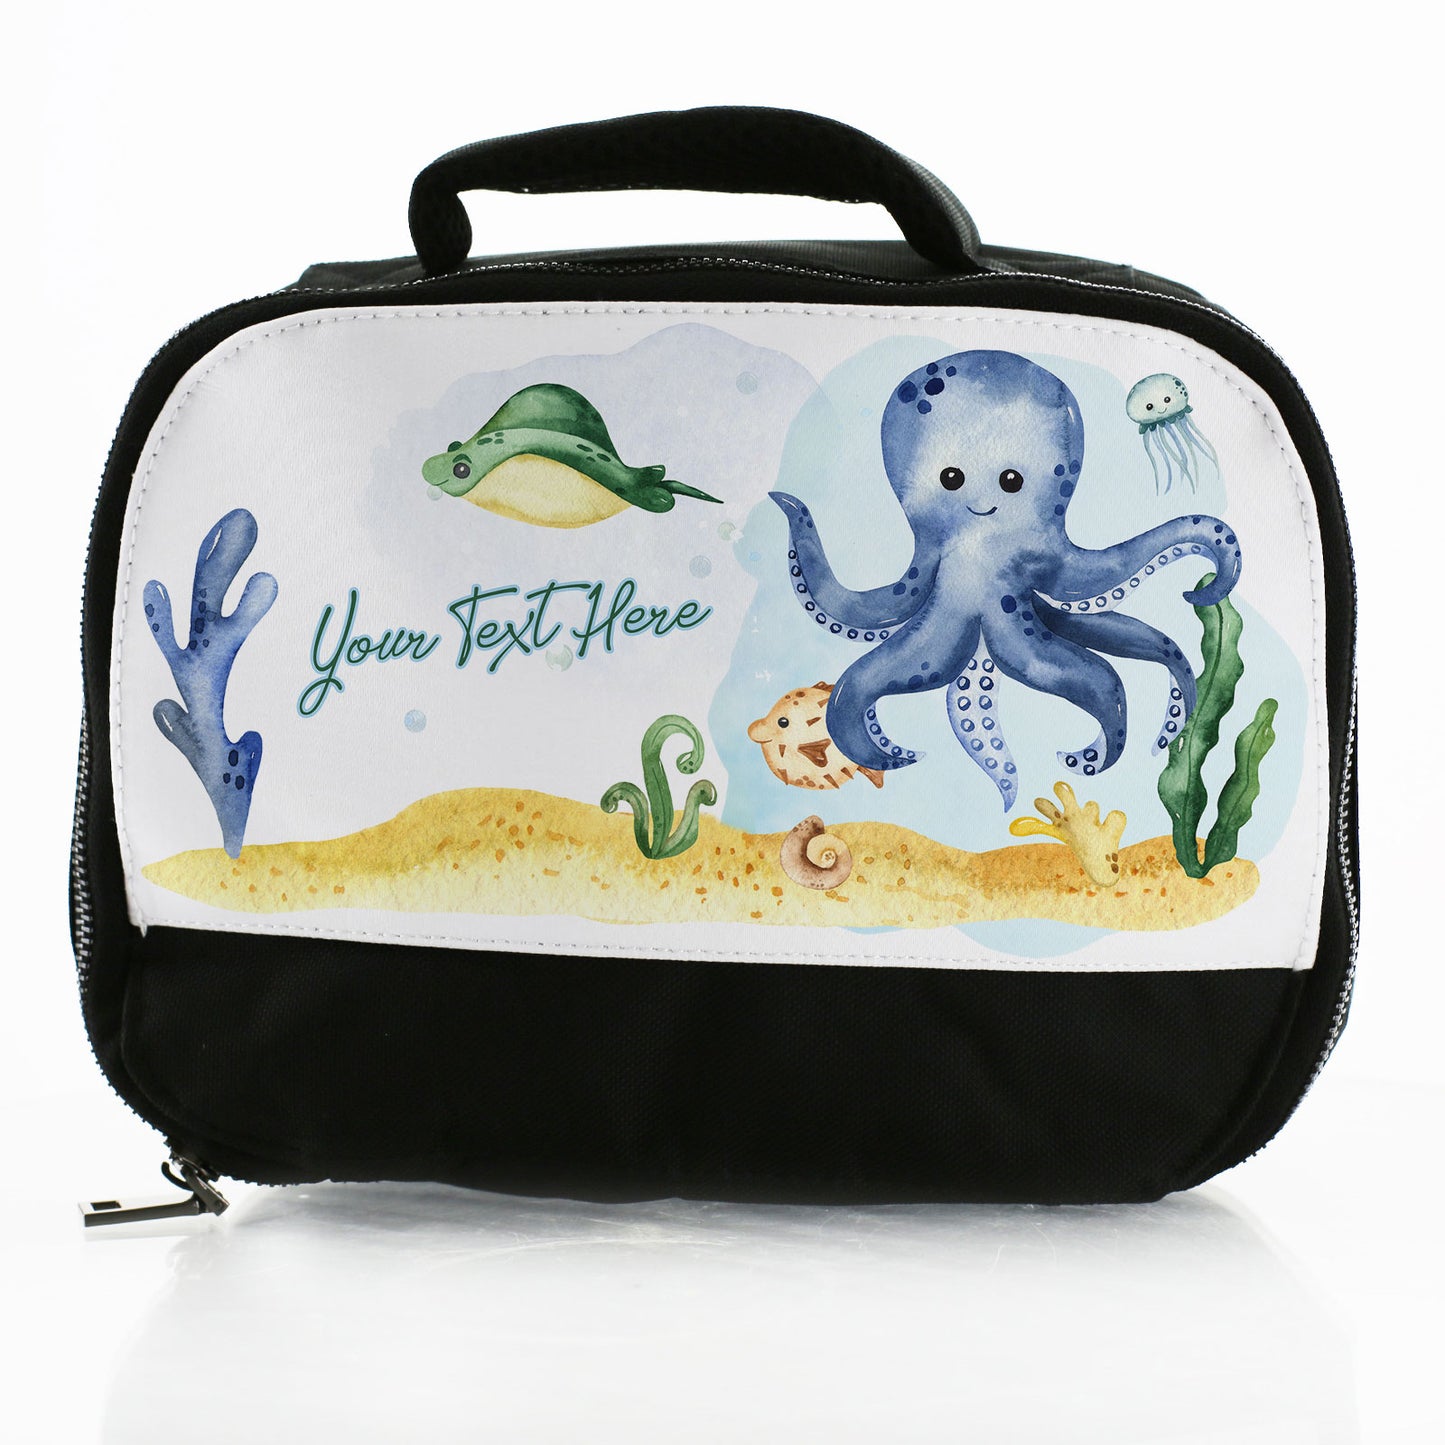 Personalised Lunch Bag with Blue Octopus & Name